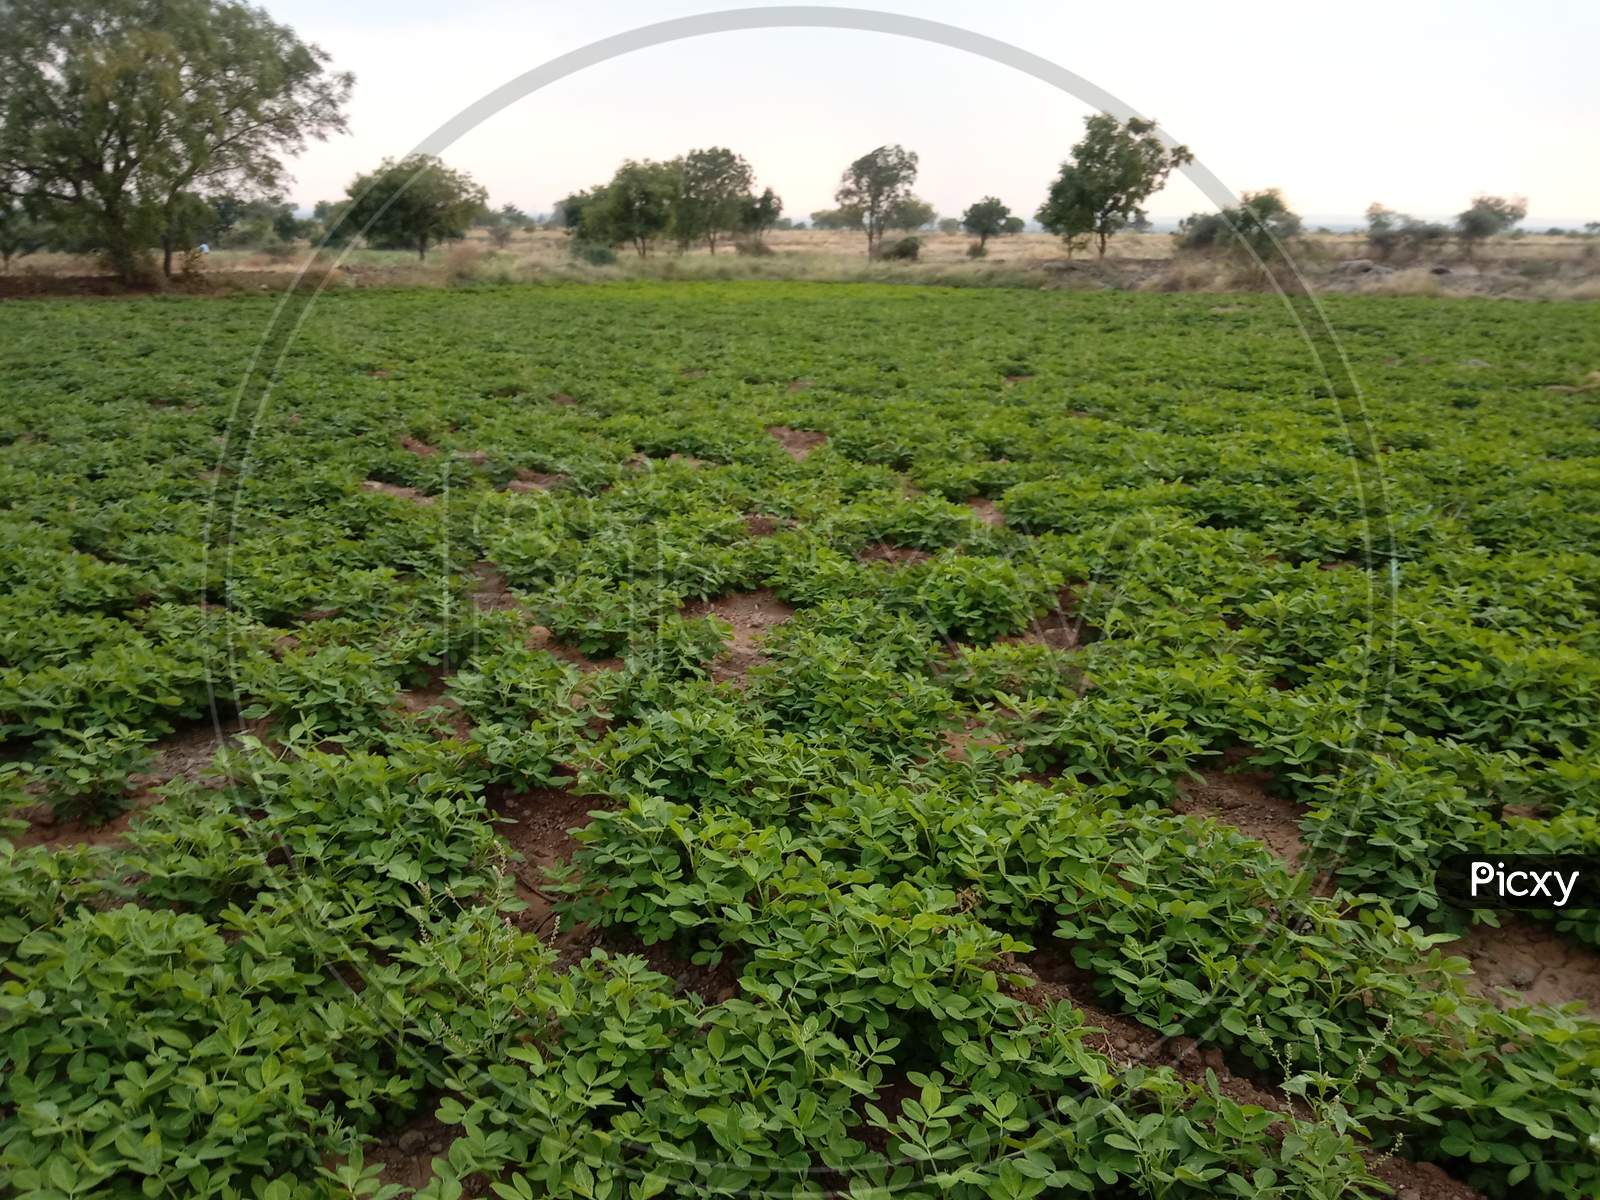 Global Warming and Groundnut Cultivation